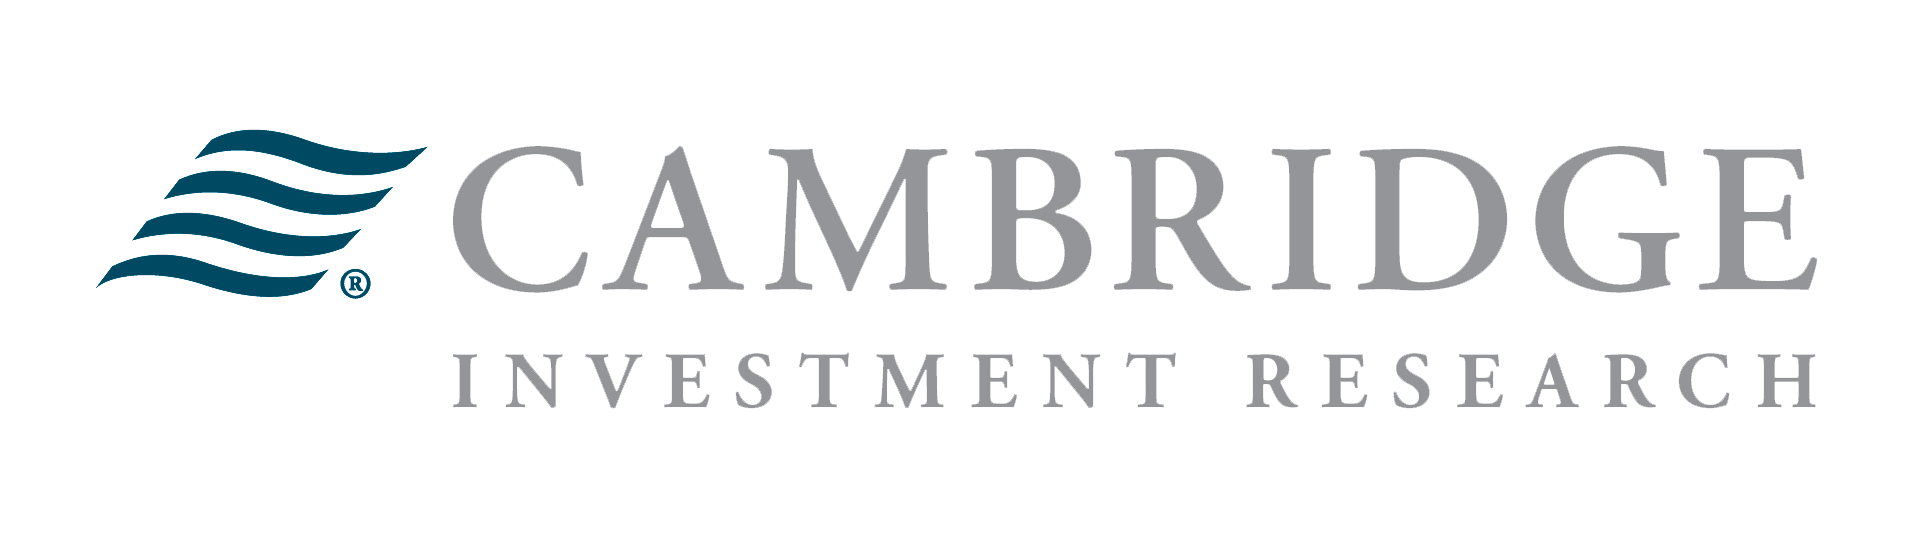 Caimbridge Investment Research